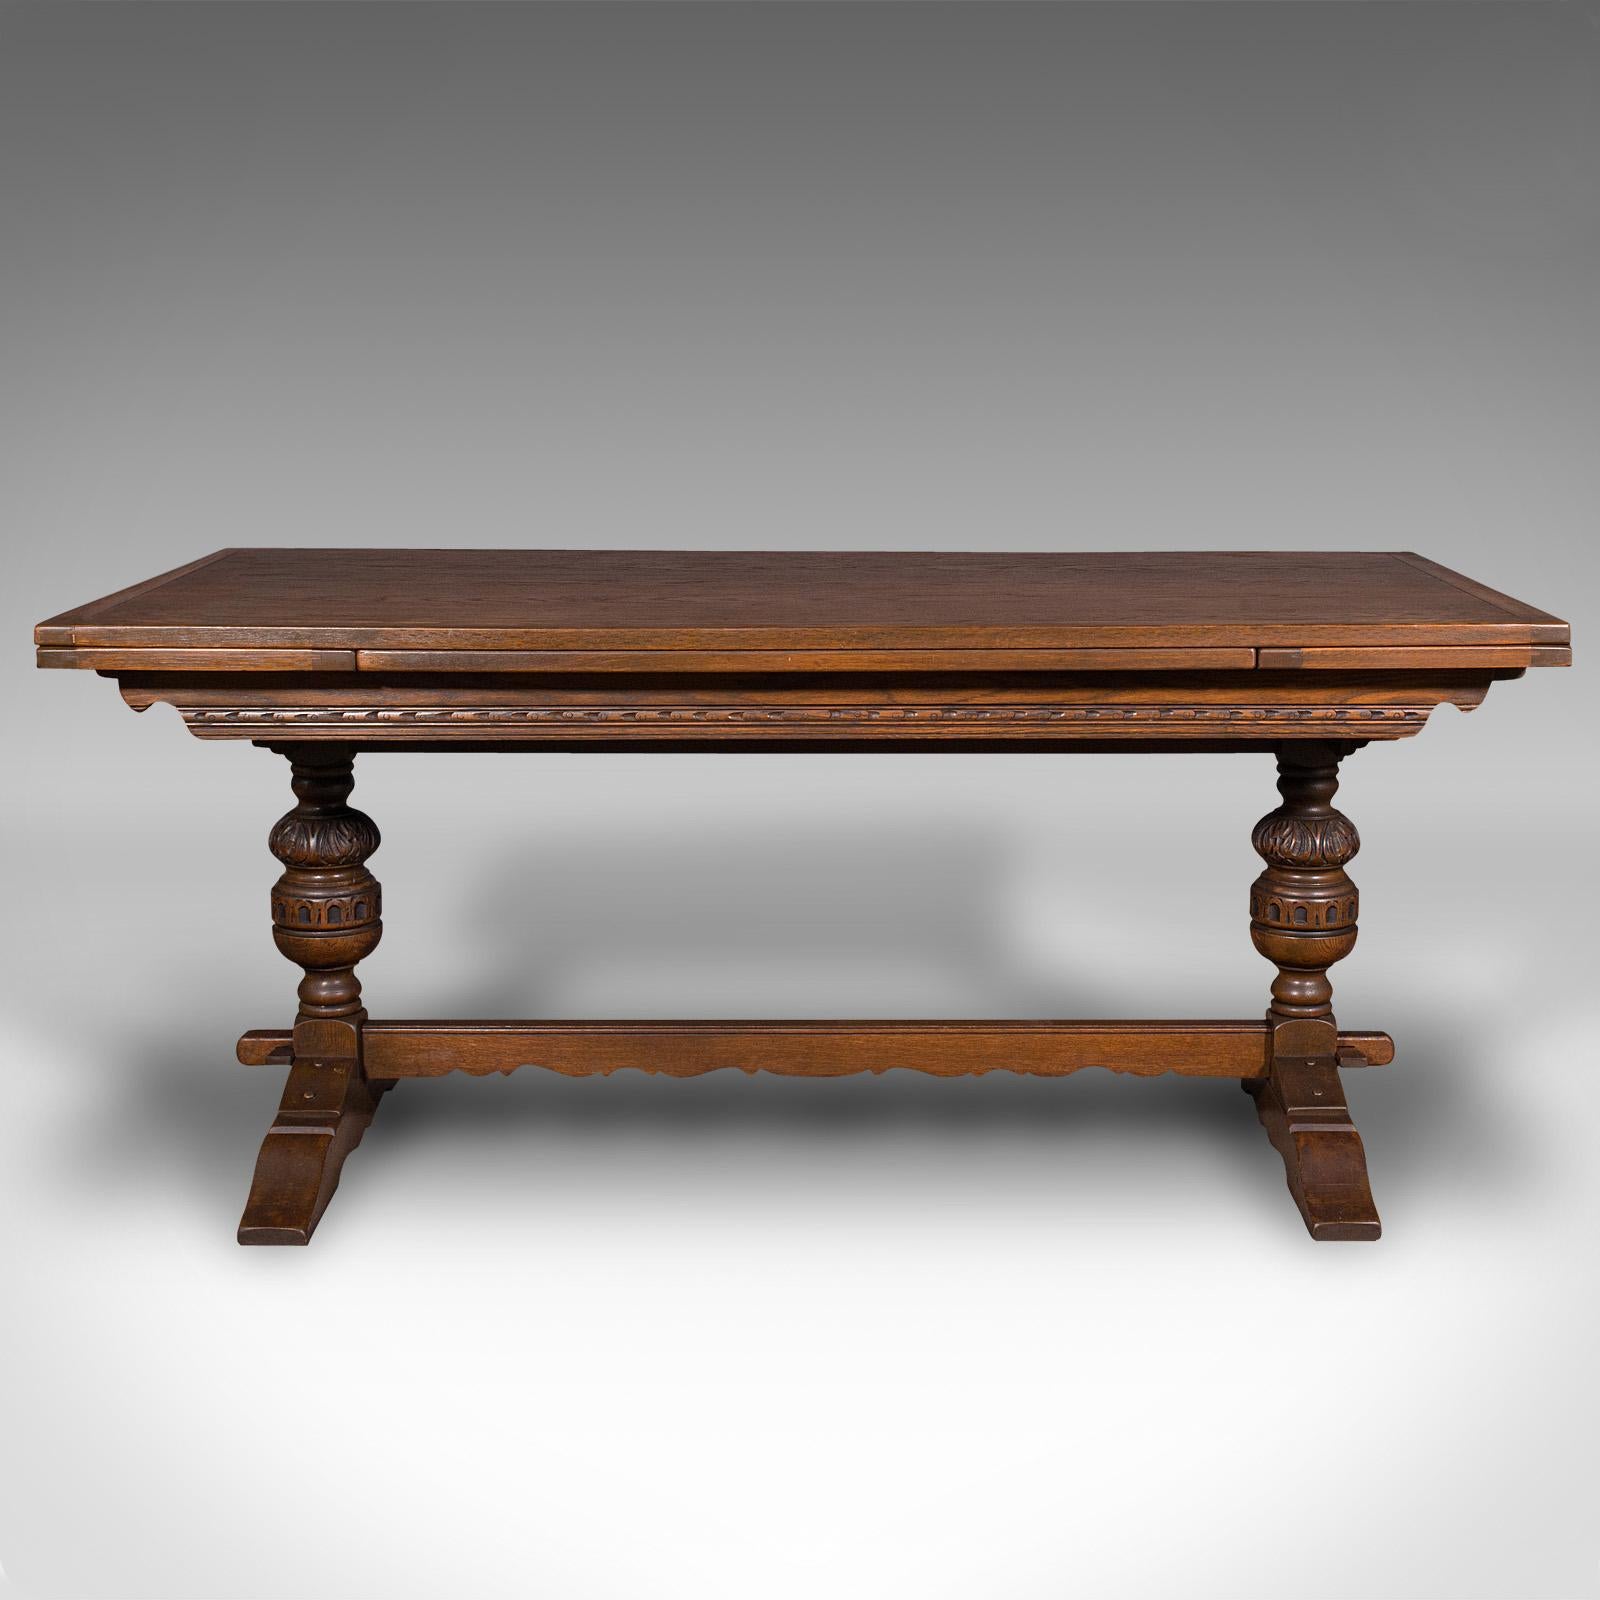 Antique Extending Dining Table, English, Oak, 6-8 Seat, Country House, Edwardian 2